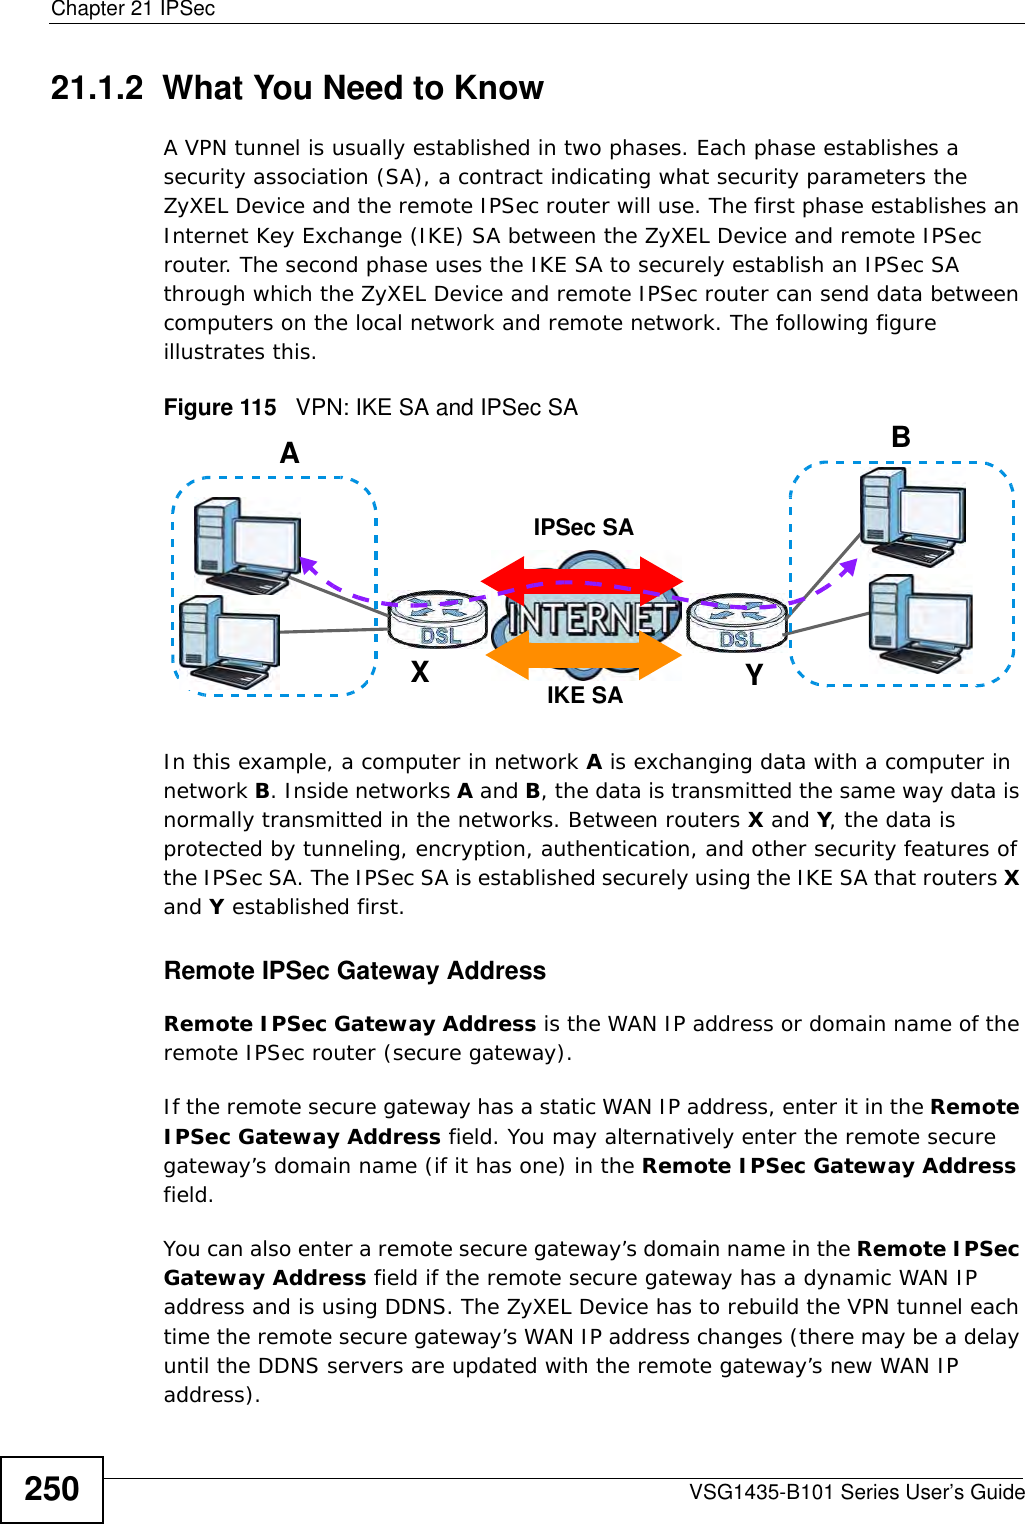 Chapter 21 IPSecVSG1435-B101 Series User’s Guide25021.1.2  What You Need to KnowA VPN tunnel is usually established in two phases. Each phase establishes a security association (SA), a contract indicating what security parameters the ZyXEL Device and the remote IPSec router will use. The first phase establishes an Internet Key Exchange (IKE) SA between the ZyXEL Device and remote IPSec router. The second phase uses the IKE SA to securely establish an IPSec SA through which the ZyXEL Device and remote IPSec router can send data between computers on the local network and remote network. The following figure illustrates this.Figure 115   VPN: IKE SA and IPSec SA In this example, a computer in network A is exchanging data with a computer in network B. Inside networks A and B, the data is transmitted the same way data is normally transmitted in the networks. Between routers X and Y, the data is protected by tunneling, encryption, authentication, and other security features of the IPSec SA. The IPSec SA is established securely using the IKE SA that routers X and Y established first.Remote IPSec Gateway Address Remote IPSec Gateway Address is the WAN IP address or domain name of the remote IPSec router (secure gateway).If the remote secure gateway has a static WAN IP address, enter it in the Remote IPSec Gateway Address field. You may alternatively enter the remote secure gateway’s domain name (if it has one) in the Remote IPSec Gateway Address field. You can also enter a remote secure gateway’s domain name in the Remote IPSec Gateway Address field if the remote secure gateway has a dynamic WAN IP address and is using DDNS. The ZyXEL Device has to rebuild the VPN tunnel each time the remote secure gateway’s WAN IP address changes (there may be a delay until the DDNS servers are updated with the remote gateway’s new WAN IP address). AXYBIPSec SAIKE SA